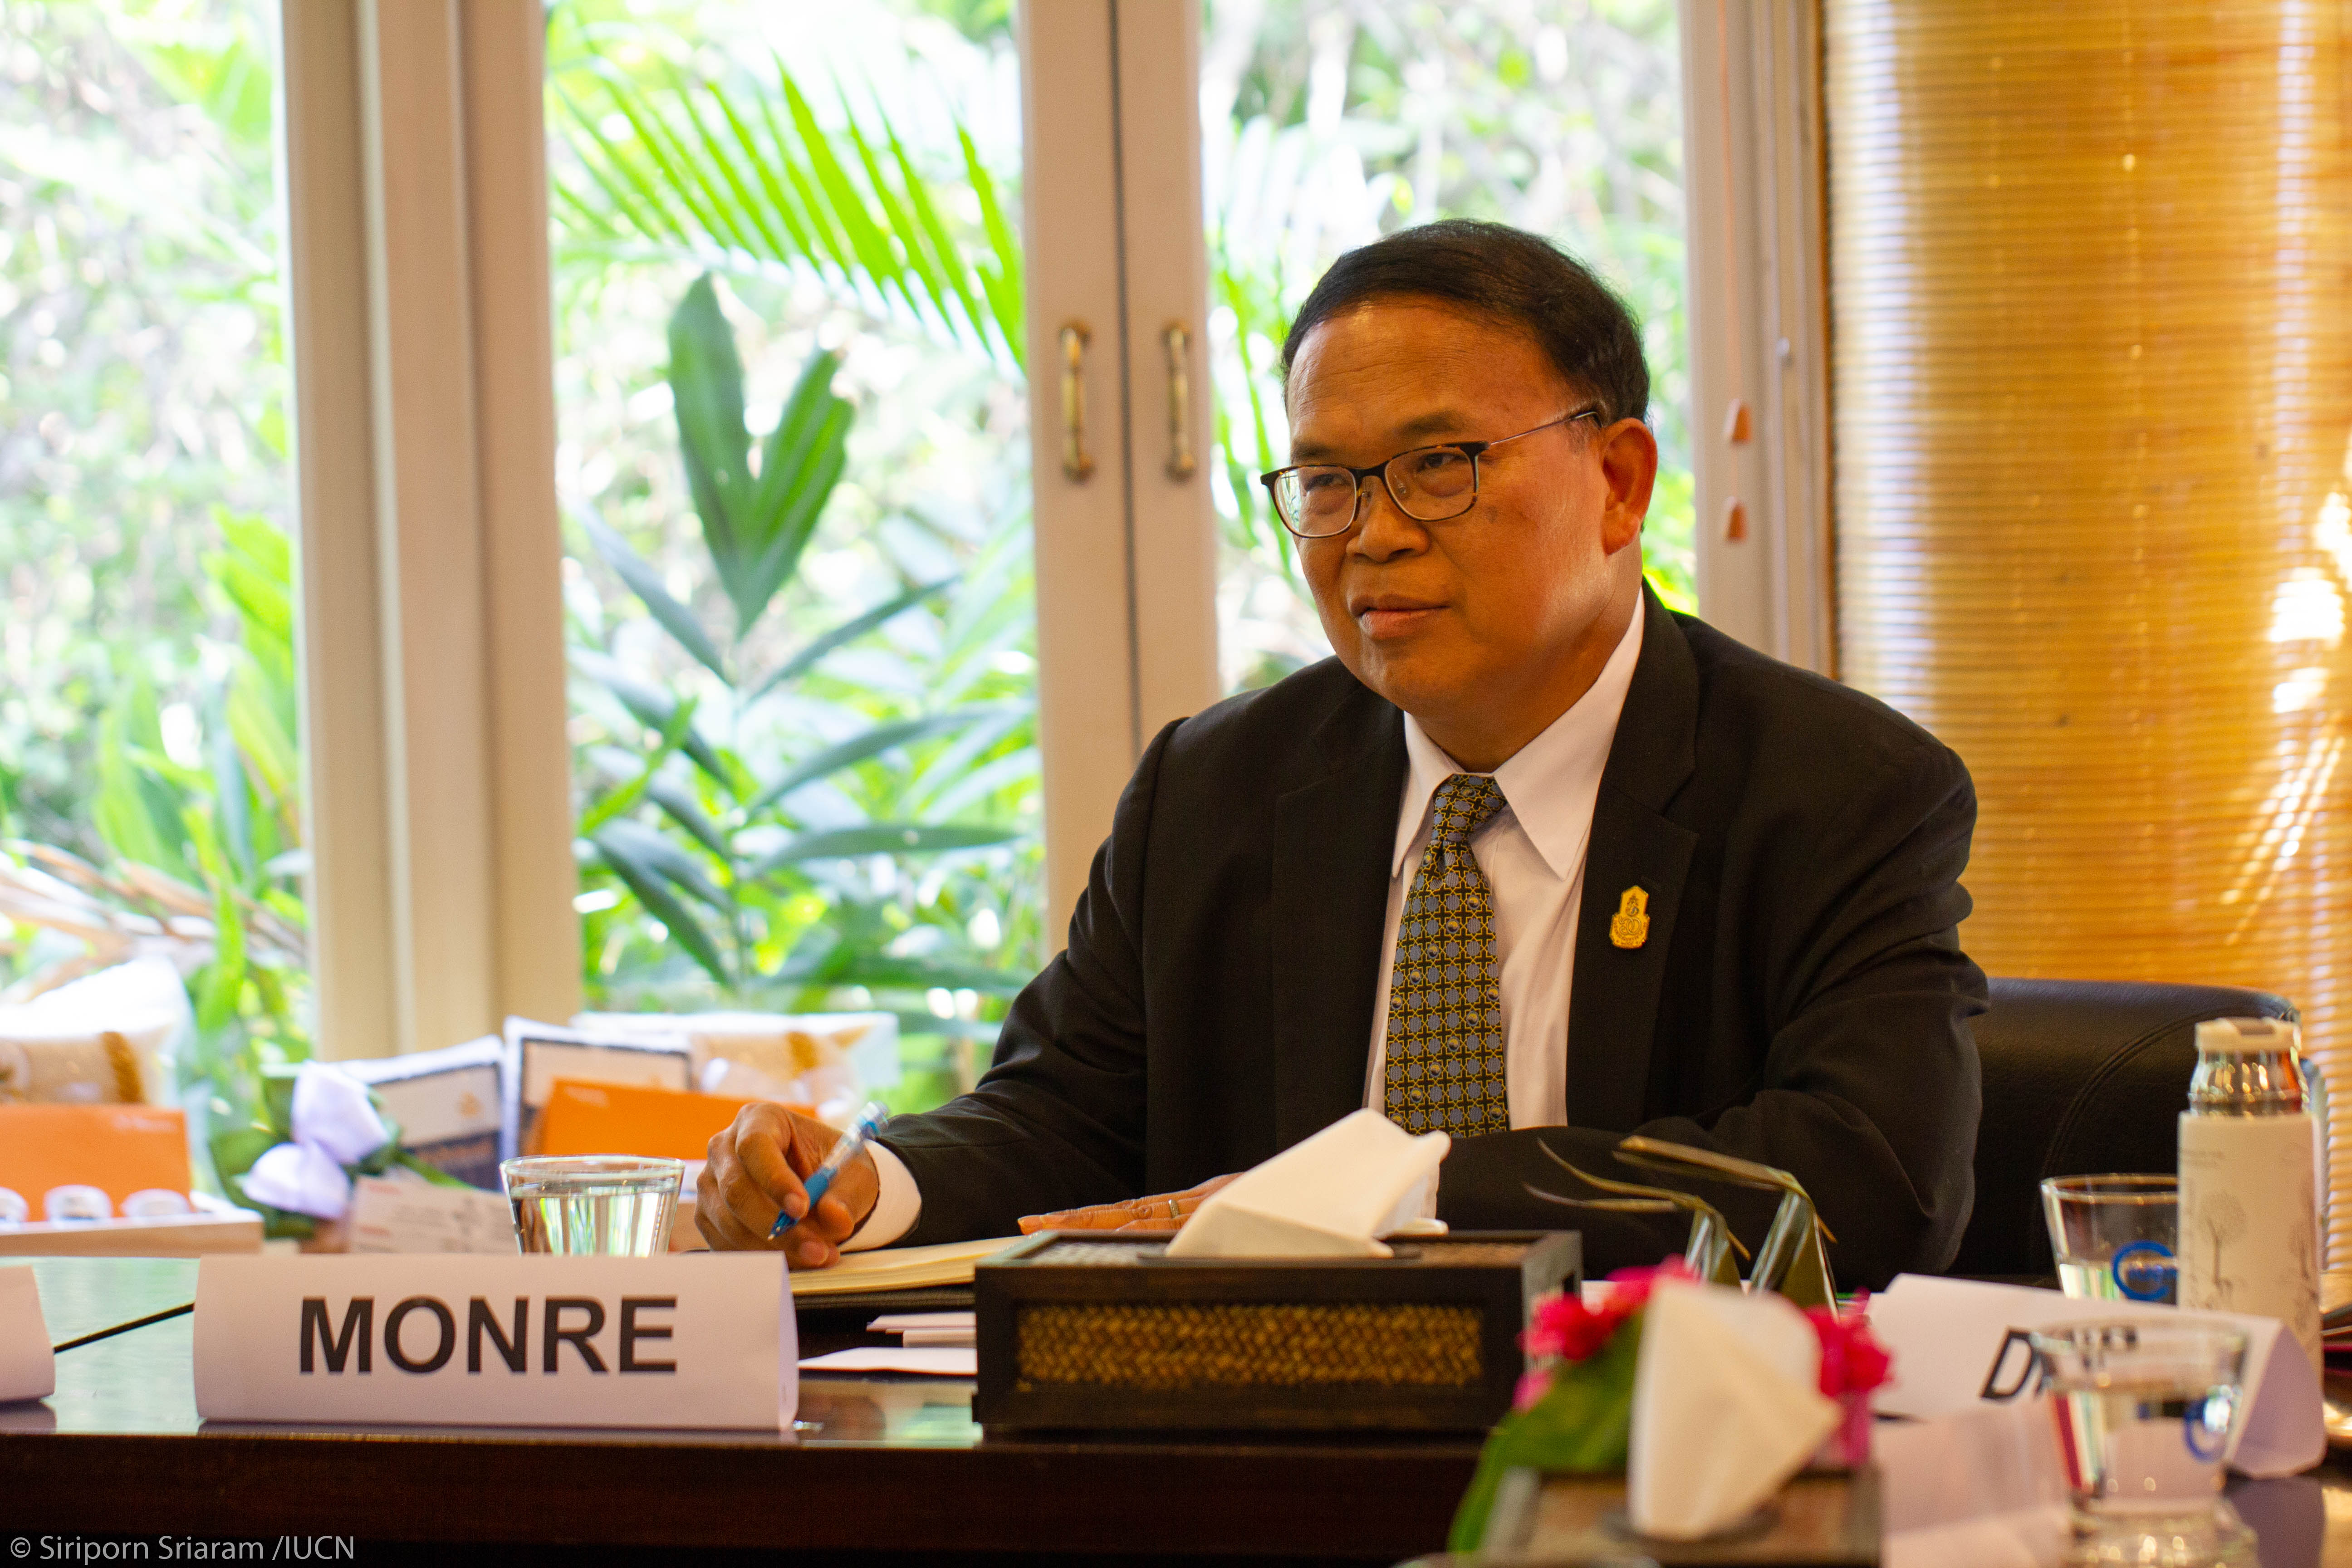 Dr. Wijarn Simachaya, Permanent Secretary of the Ministry of Natural Resources and Environment, Thailand